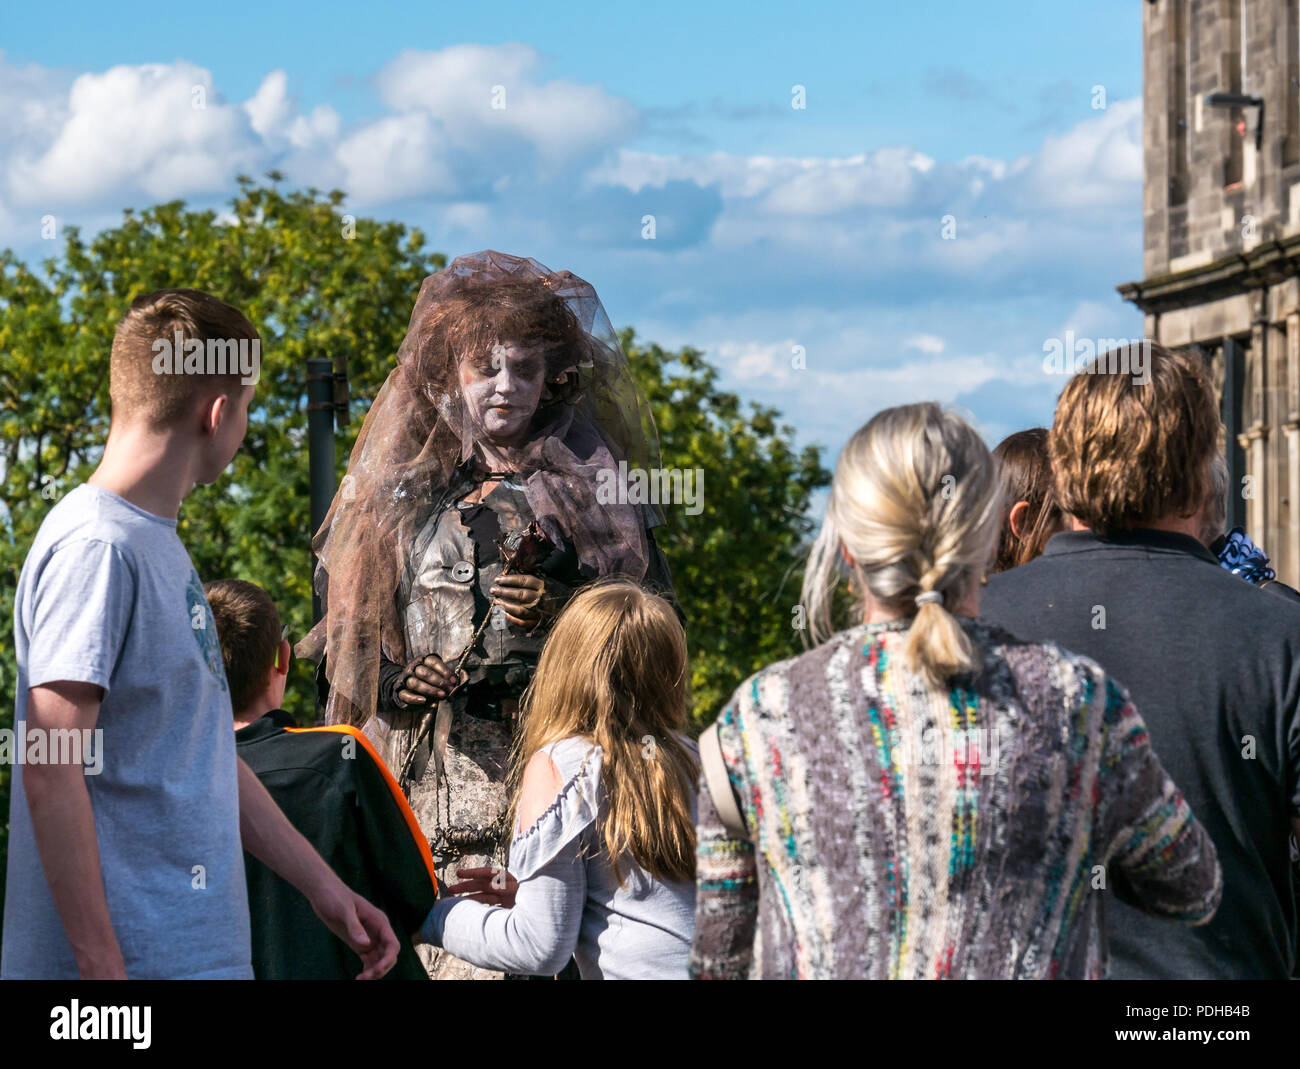 Edinburgh, Scotland, UK. 9th August 2018. Edinburgh Fringe Festival, Royal Mile, Edinburgh, Scotland, United Kingdom. On a sunny festival day the Virgin Money sponsored street festival is packed with people and fringe performers. A female street performer dressed as a ghostly woman stands above the pedestrians Stock Photo